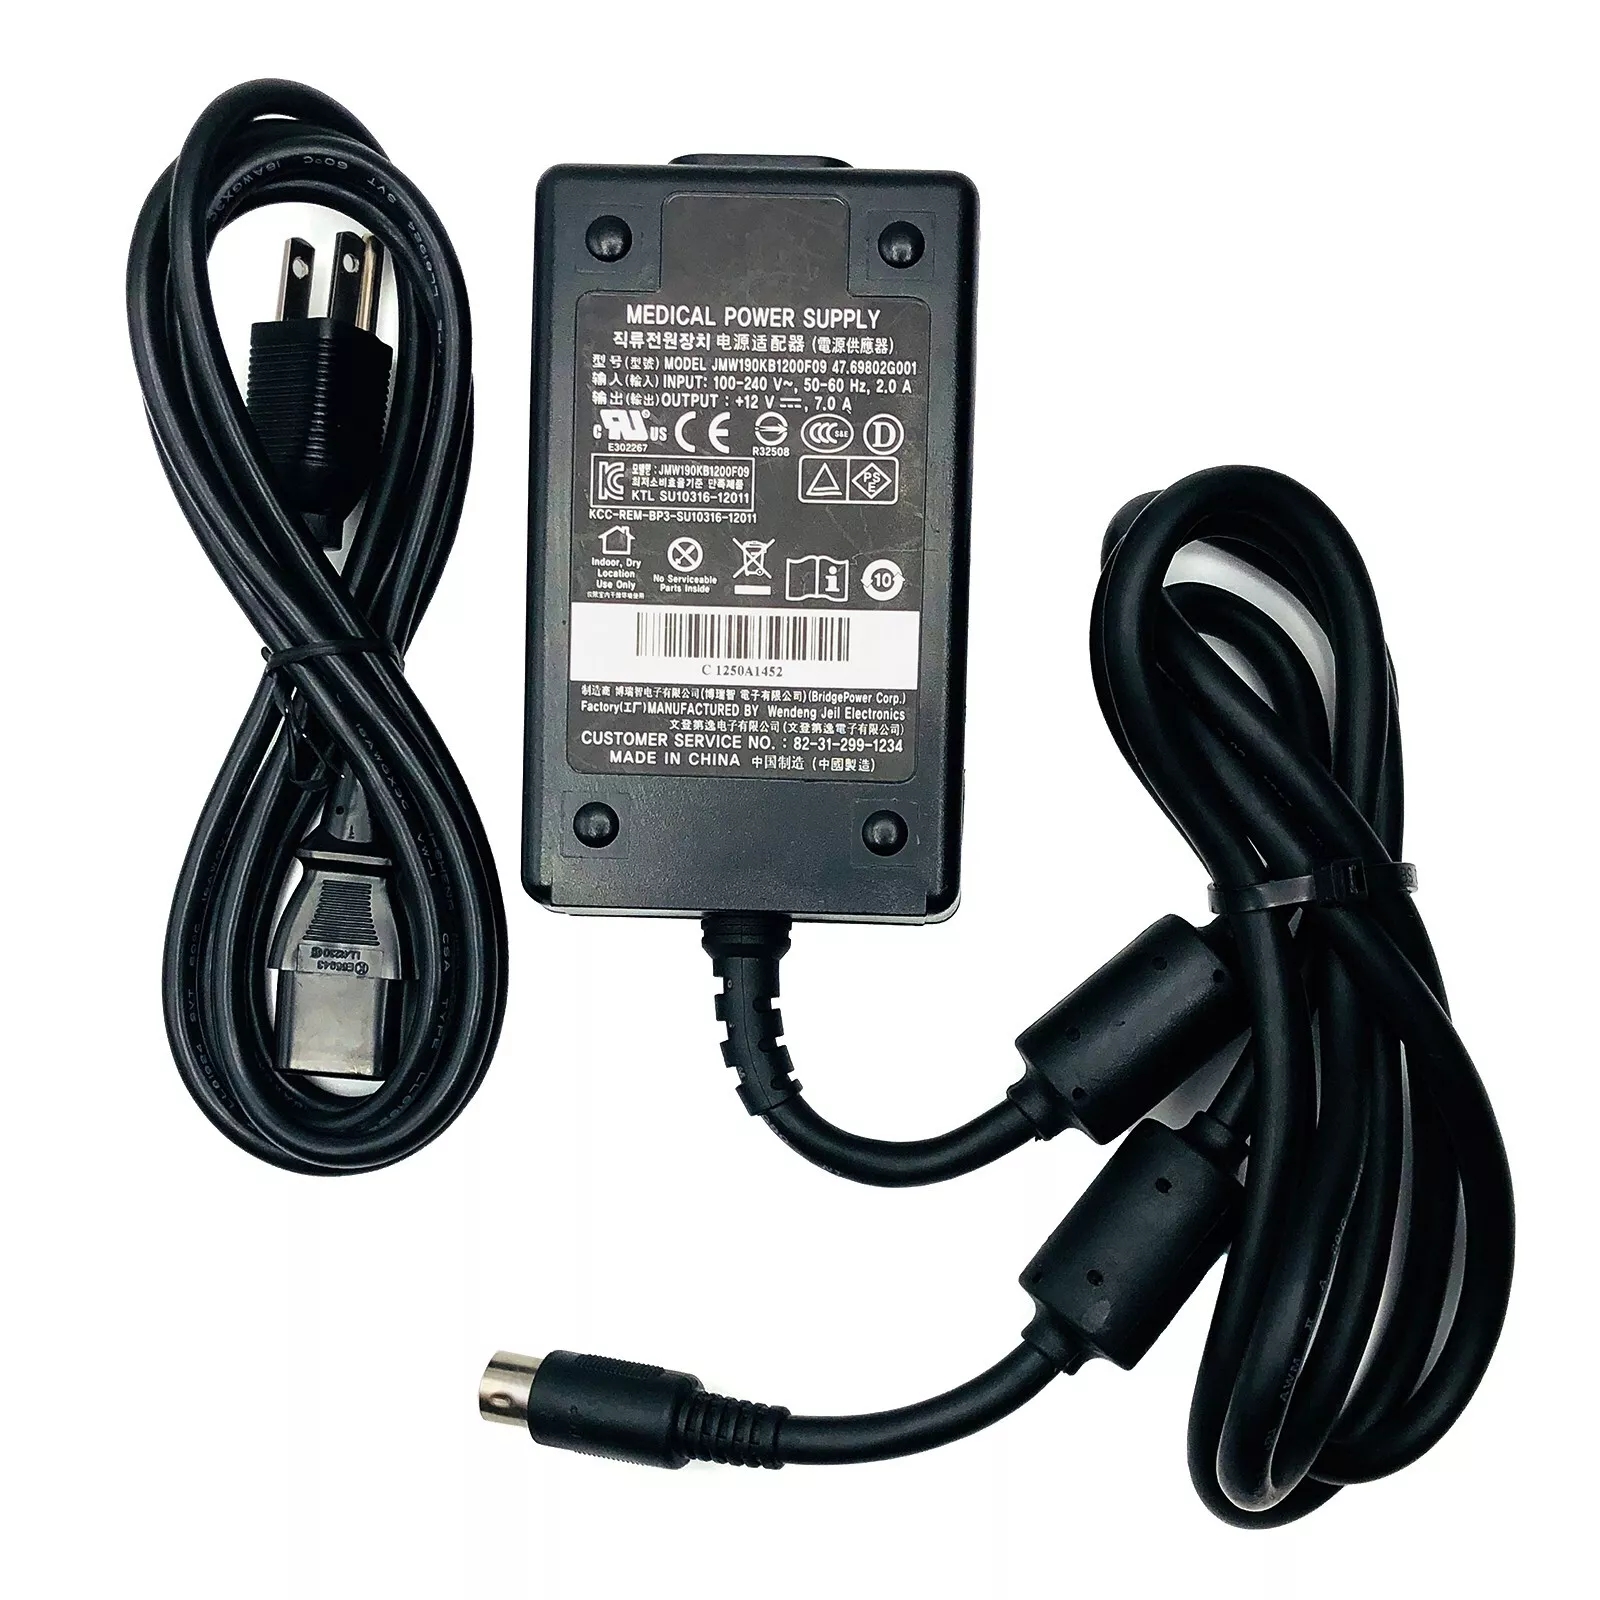 *Brand NEW*Genuine Wendeng JMW190KB1200F09 12V 7A 84W AC Adapter Medical 8Pin Power Supply